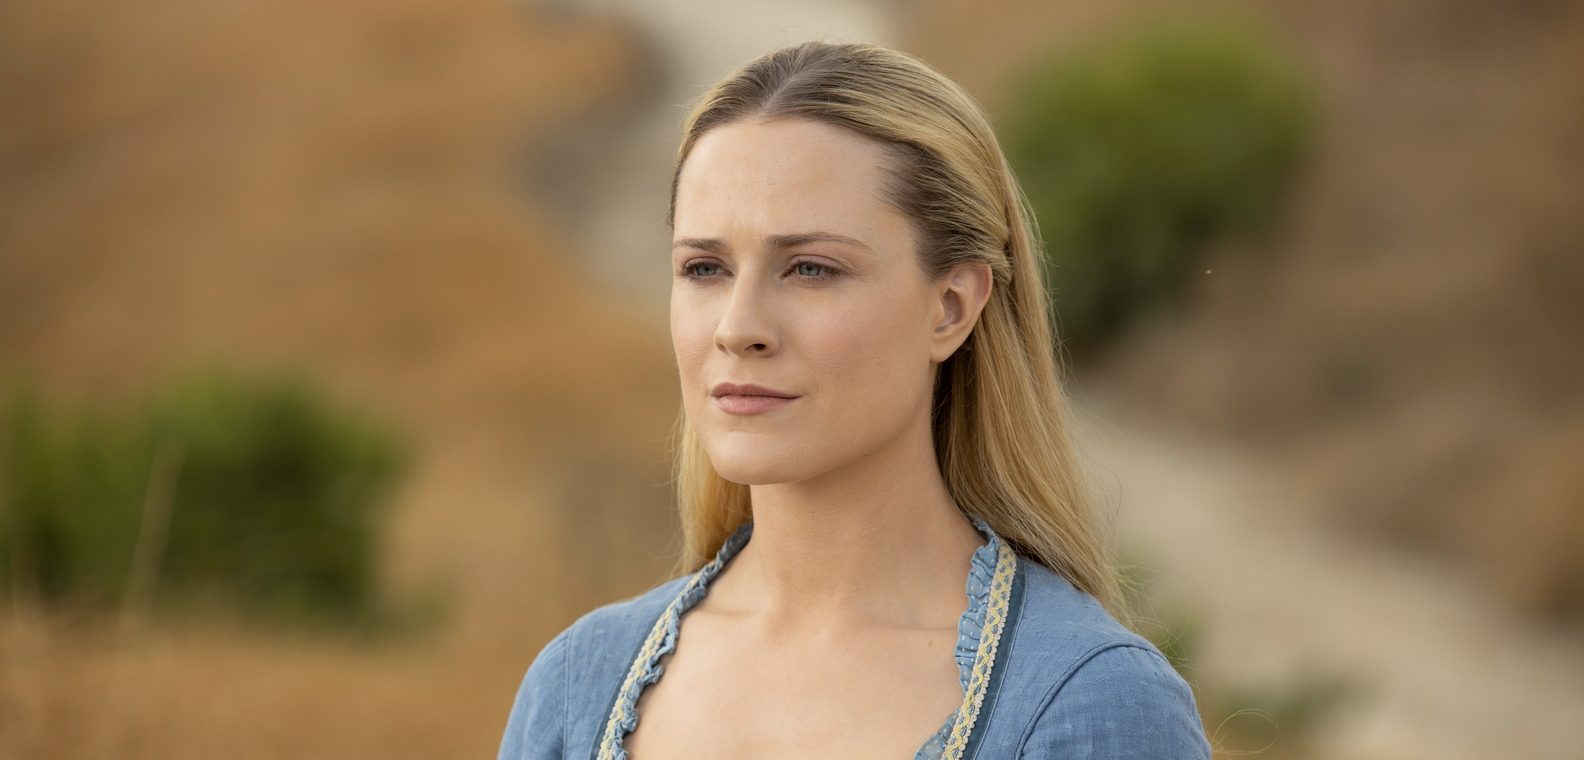 Is Christina Host or Human in Westworld? Why Do Christina and Dolores Look the Same?